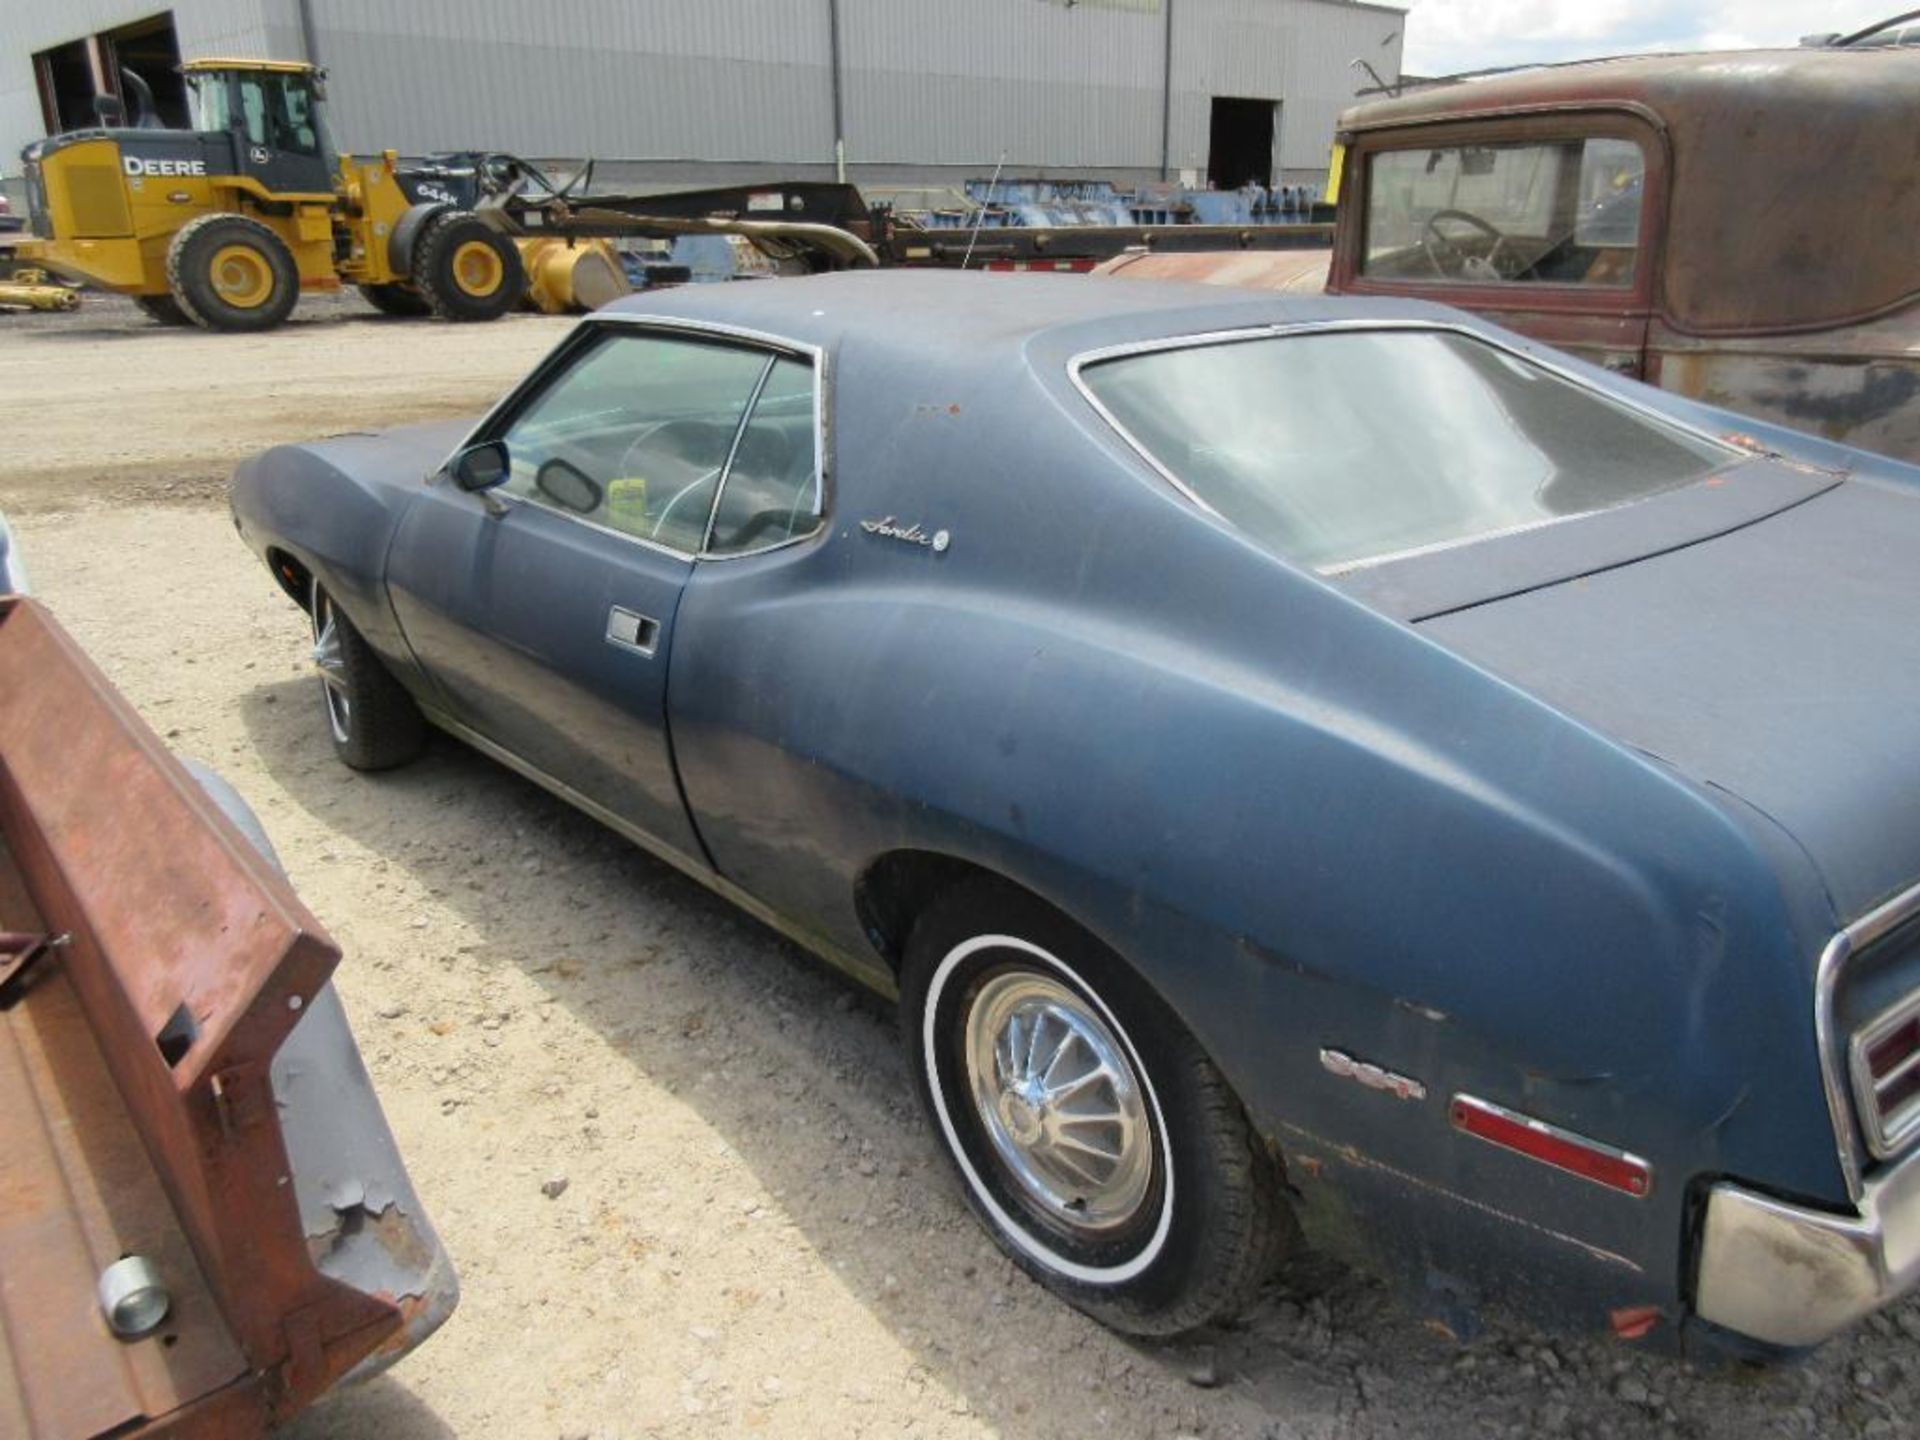 1972 AME JAVELIN, VIN# A2C797H268139, V8 ENGINE (DOES NOT RUN, HAS SALVAGE TITLE) - Image 4 of 35